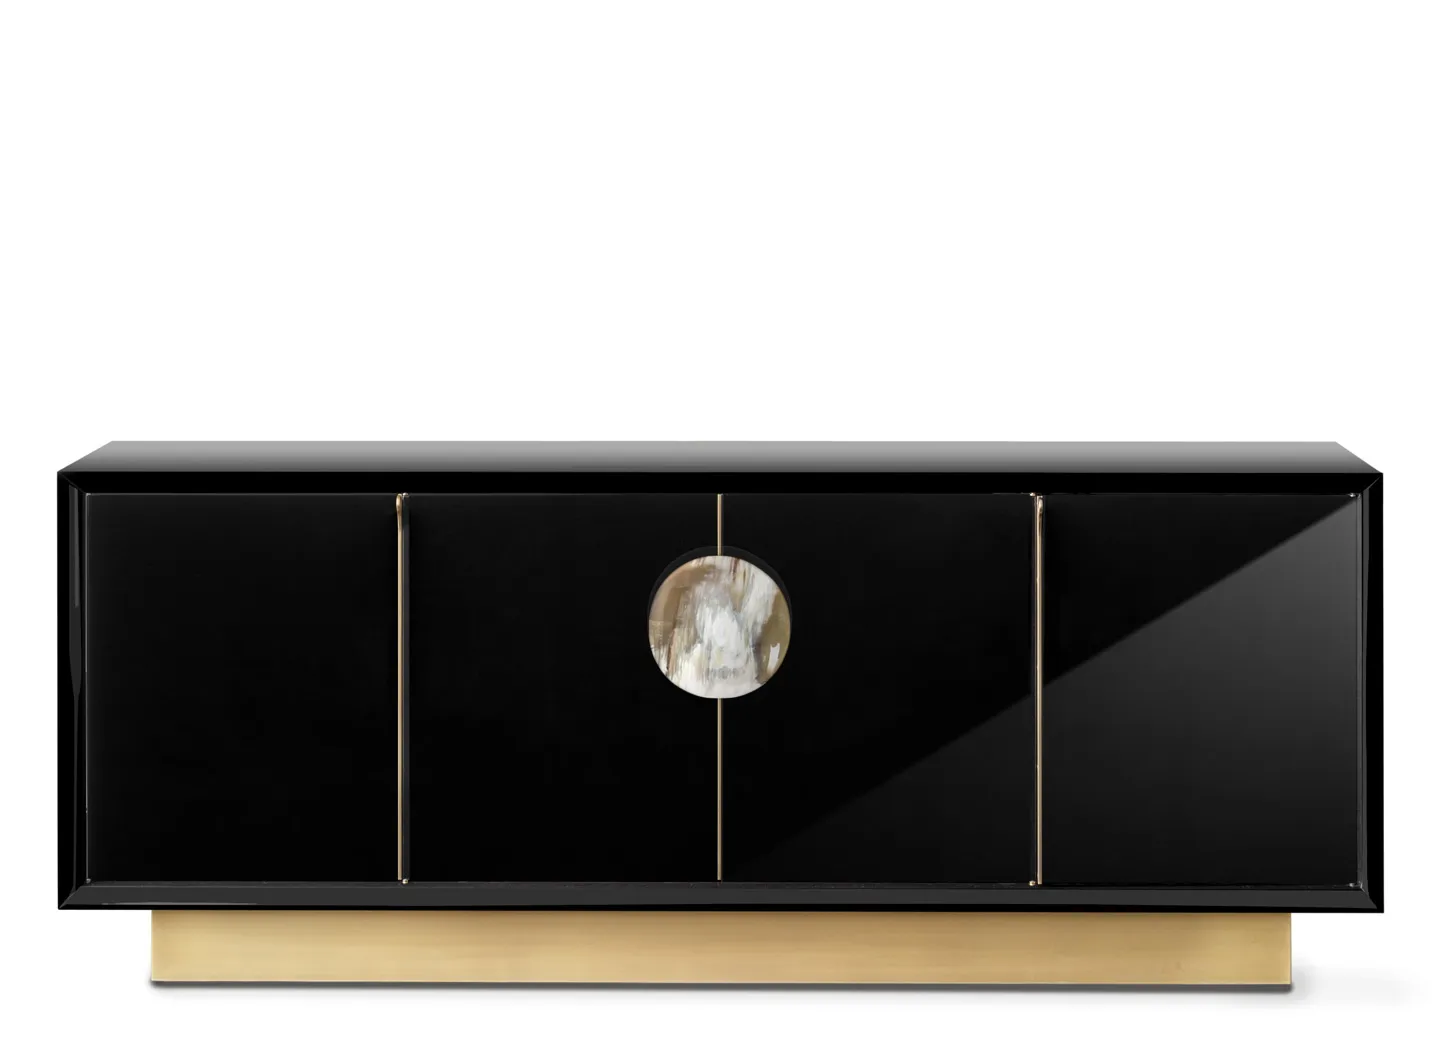 Arcahorn - Helios cabinet in black lacquer